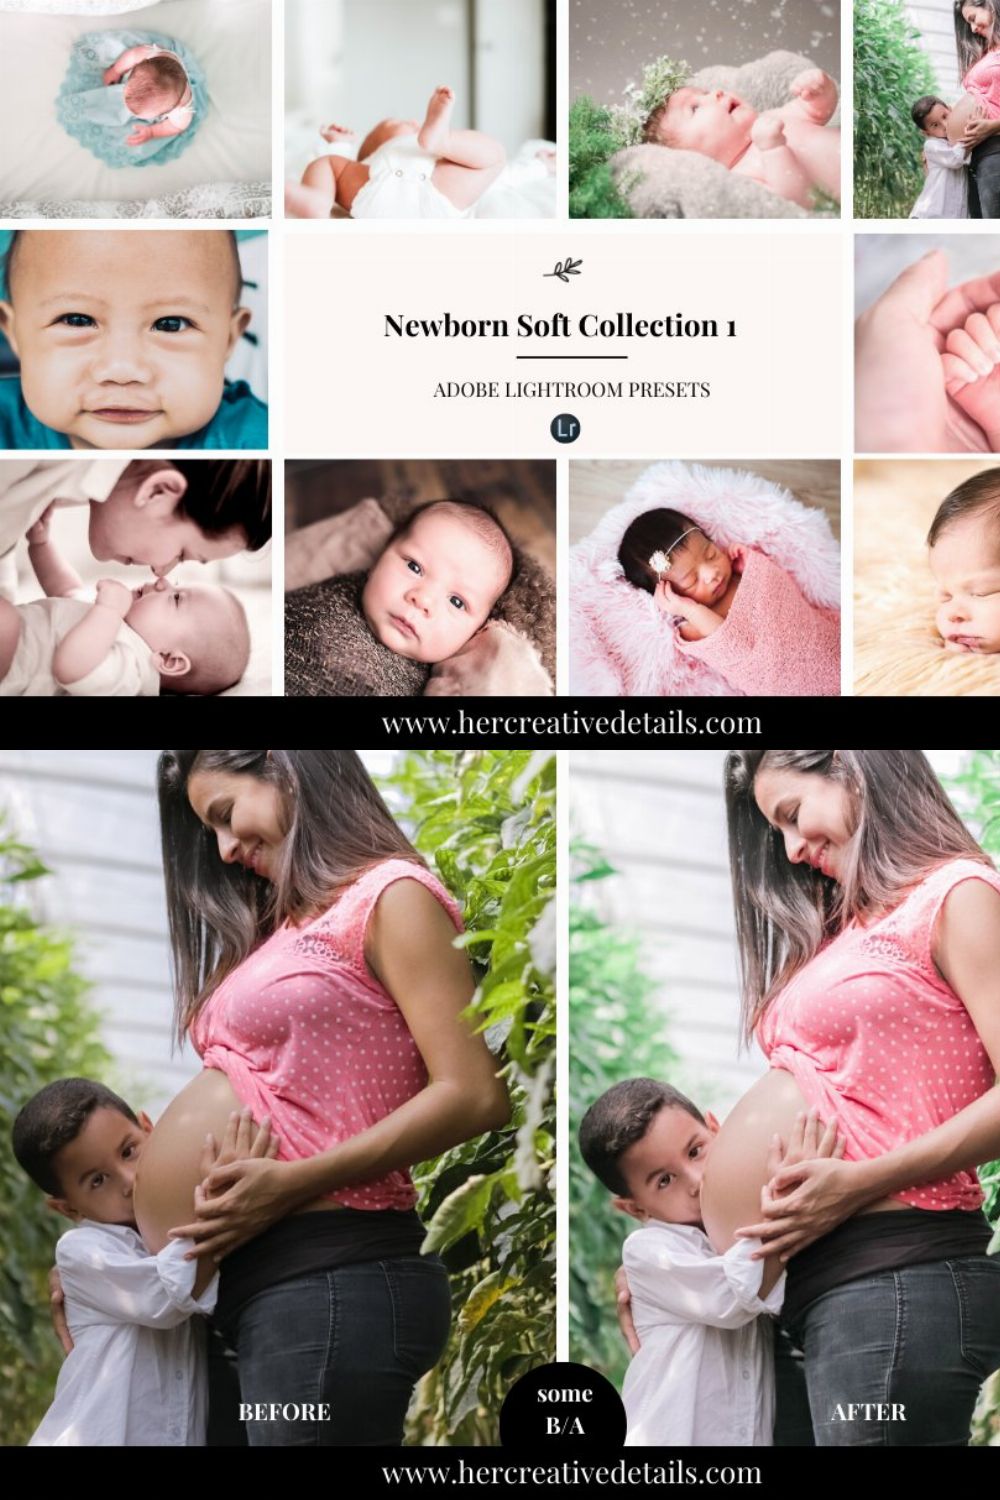 Newborn presets Soft Collection pinterest preview image.